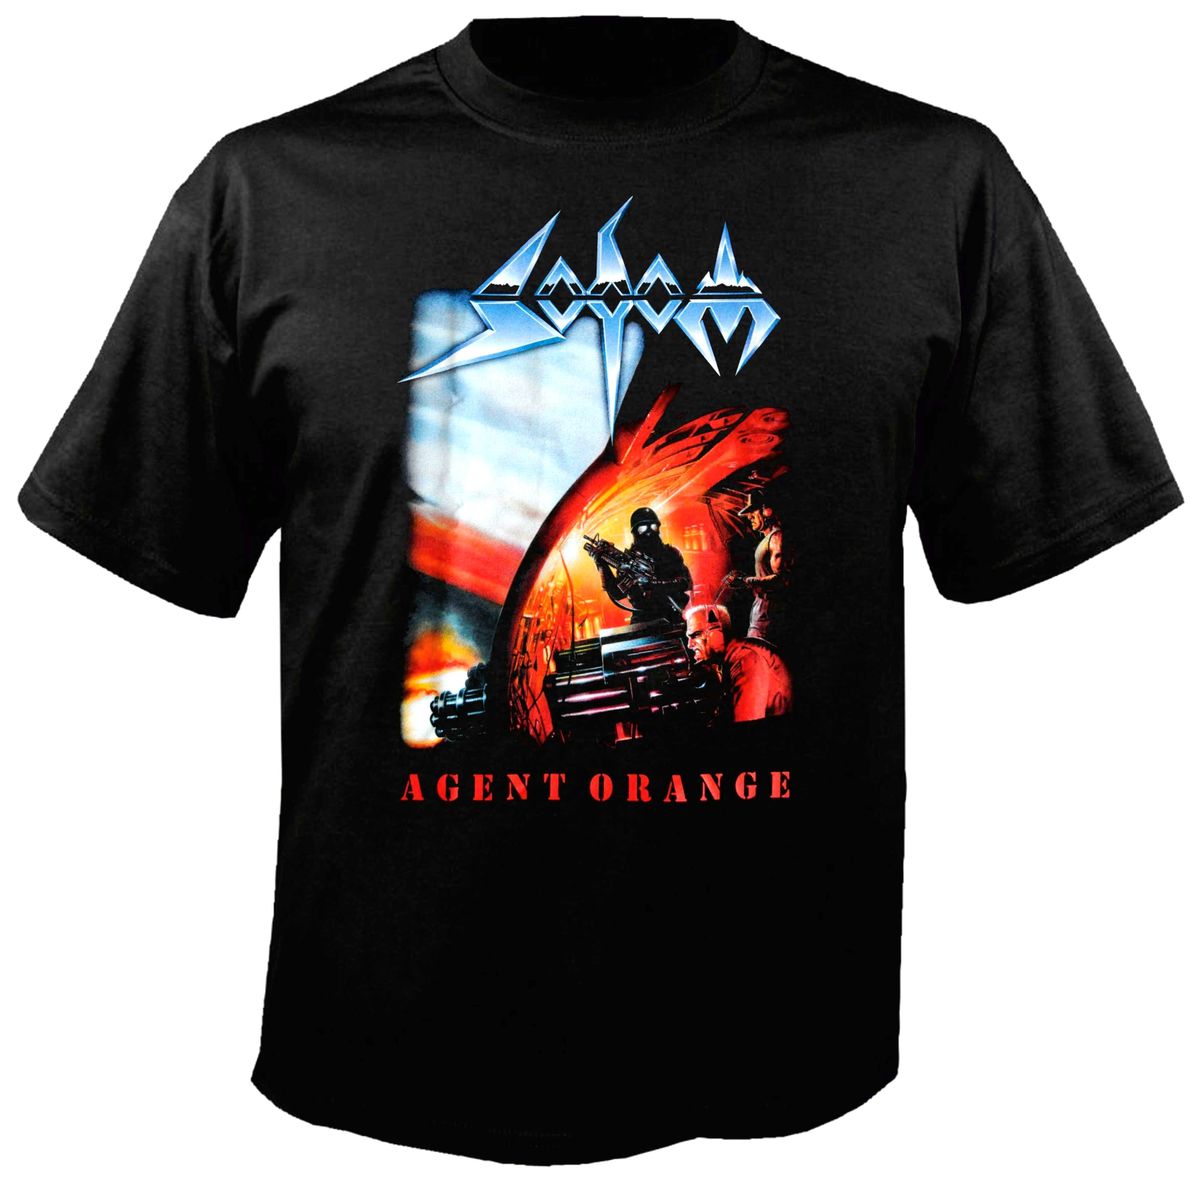 Sodom Agent Orange T-Shirt – Metal & Rock T-shirts and Accessories